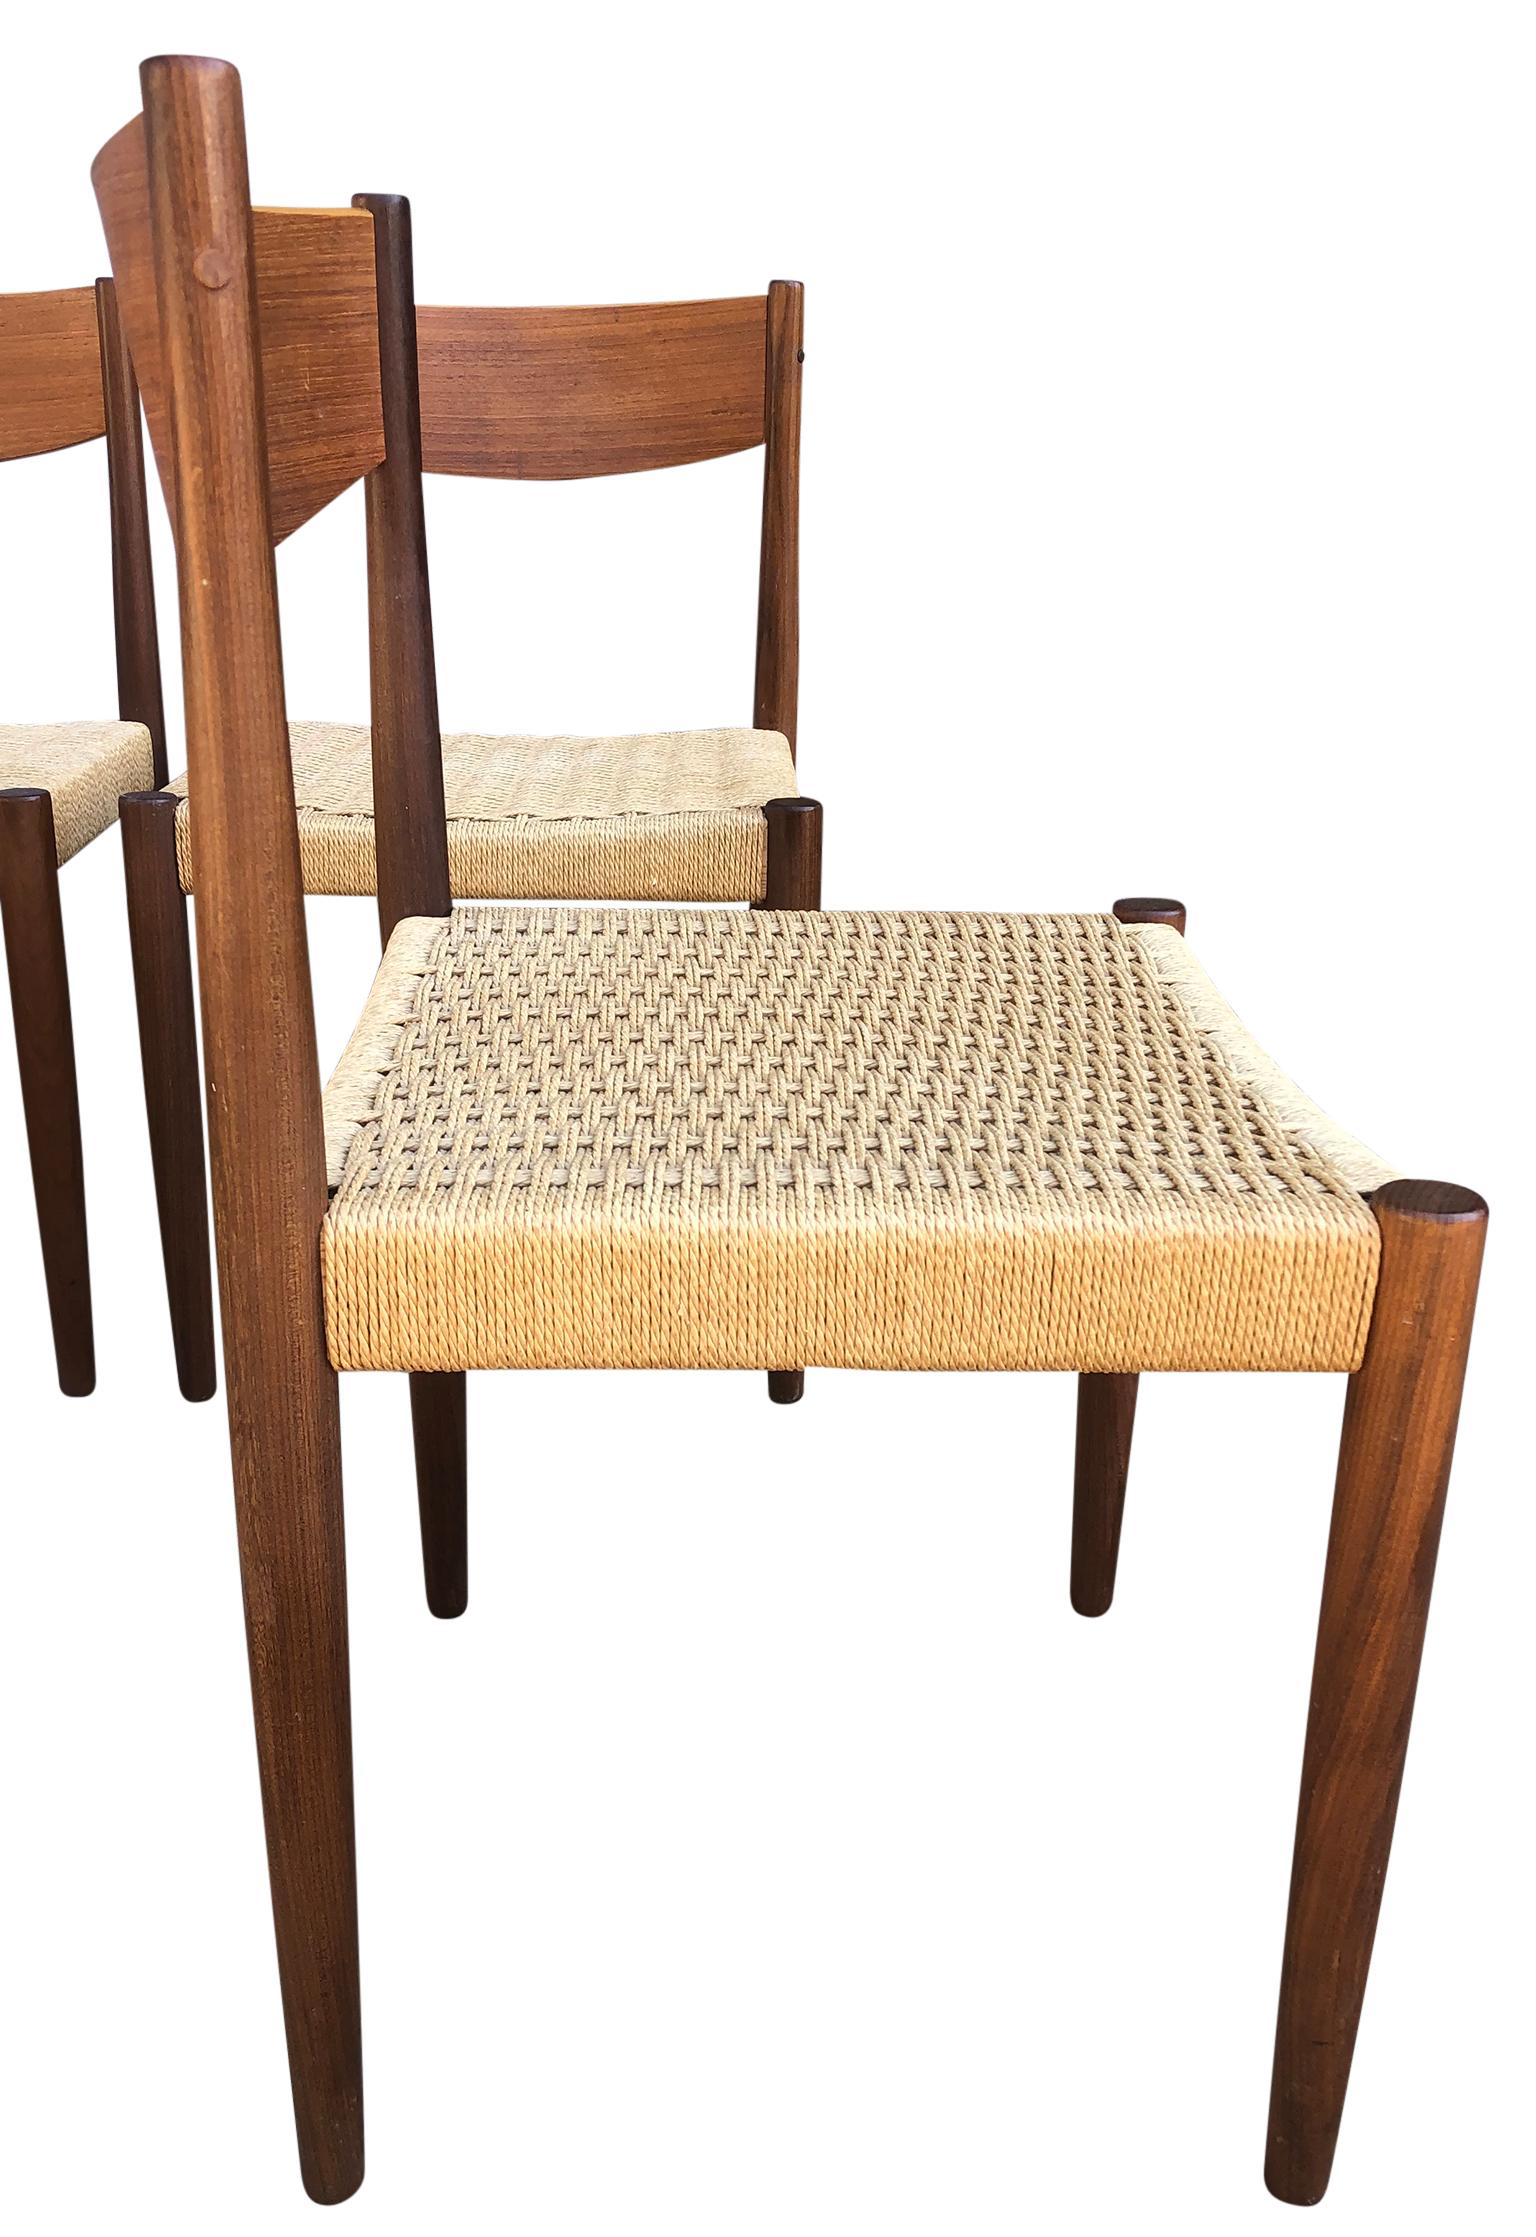 '8' Midcentury Danish Teak Papercord Dining Chairs by Poul Volther 1